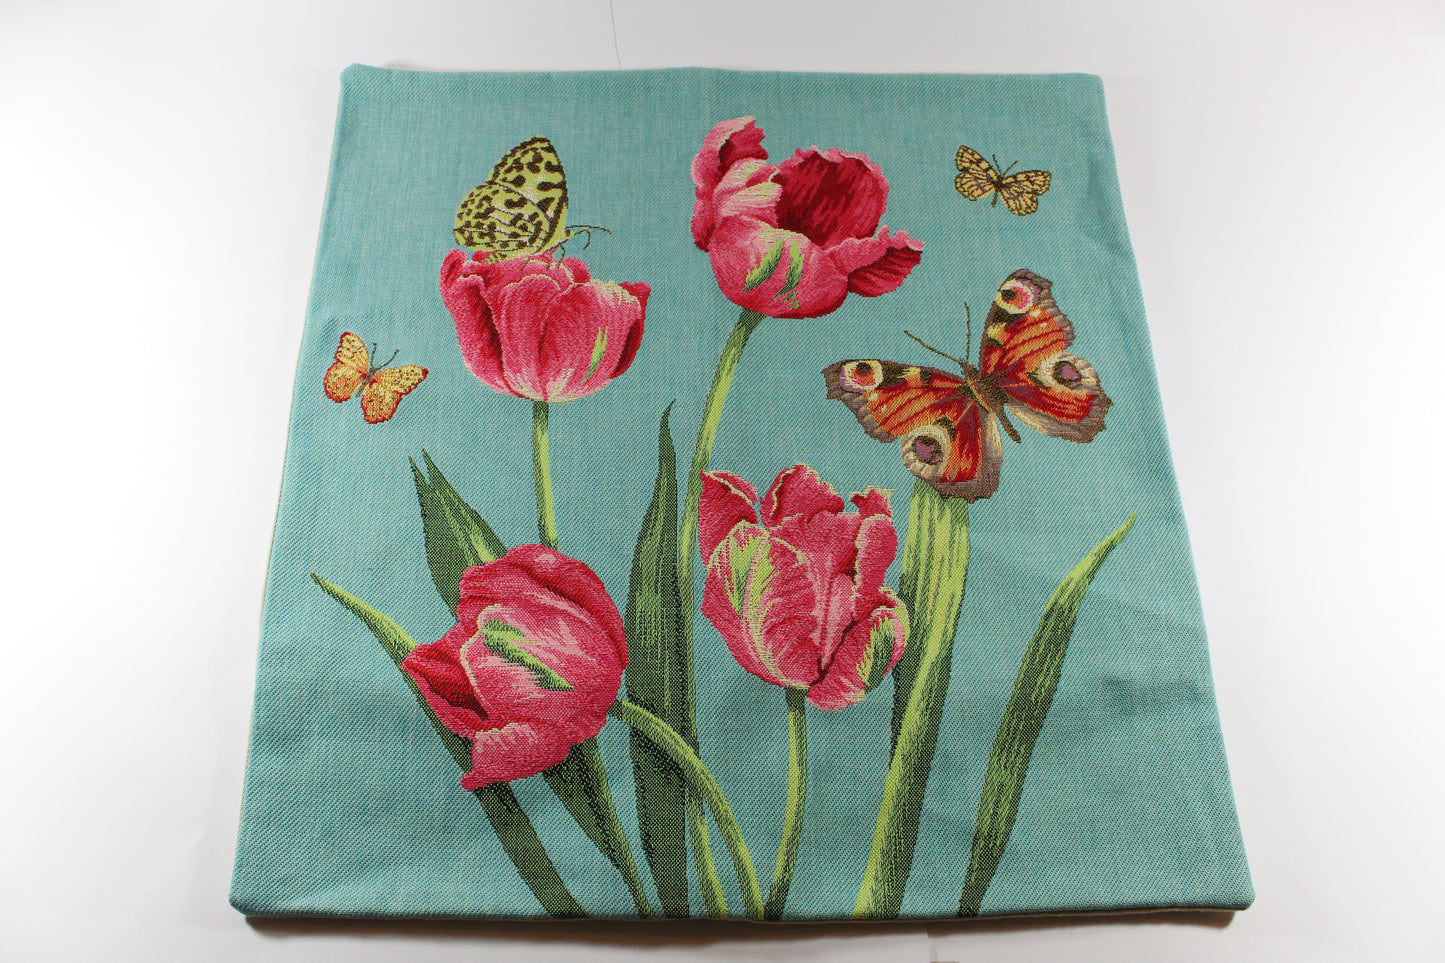 Amsterdam Tulip Museum Pink Tulips & Butterflies Large Pillow Cover